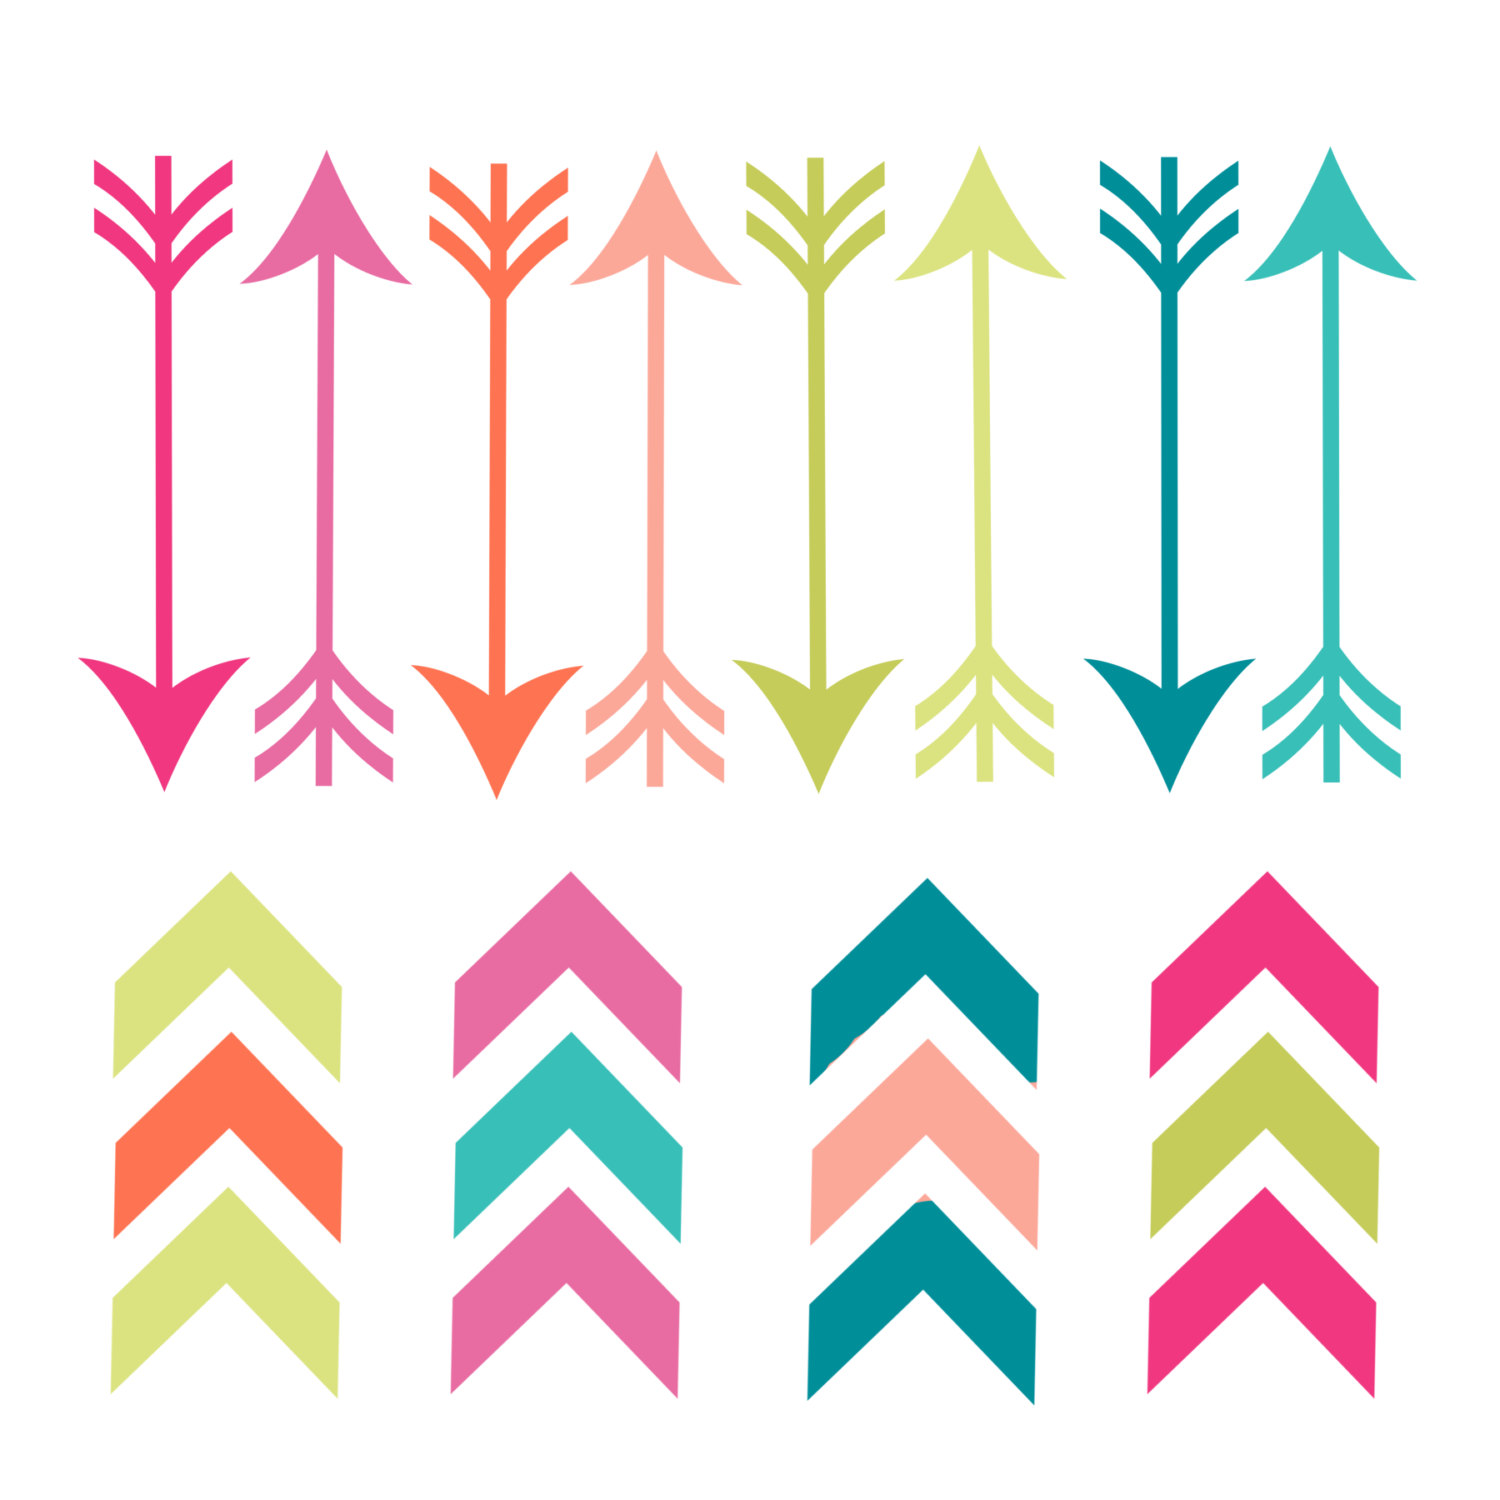 free clipart images arrows - photo #29